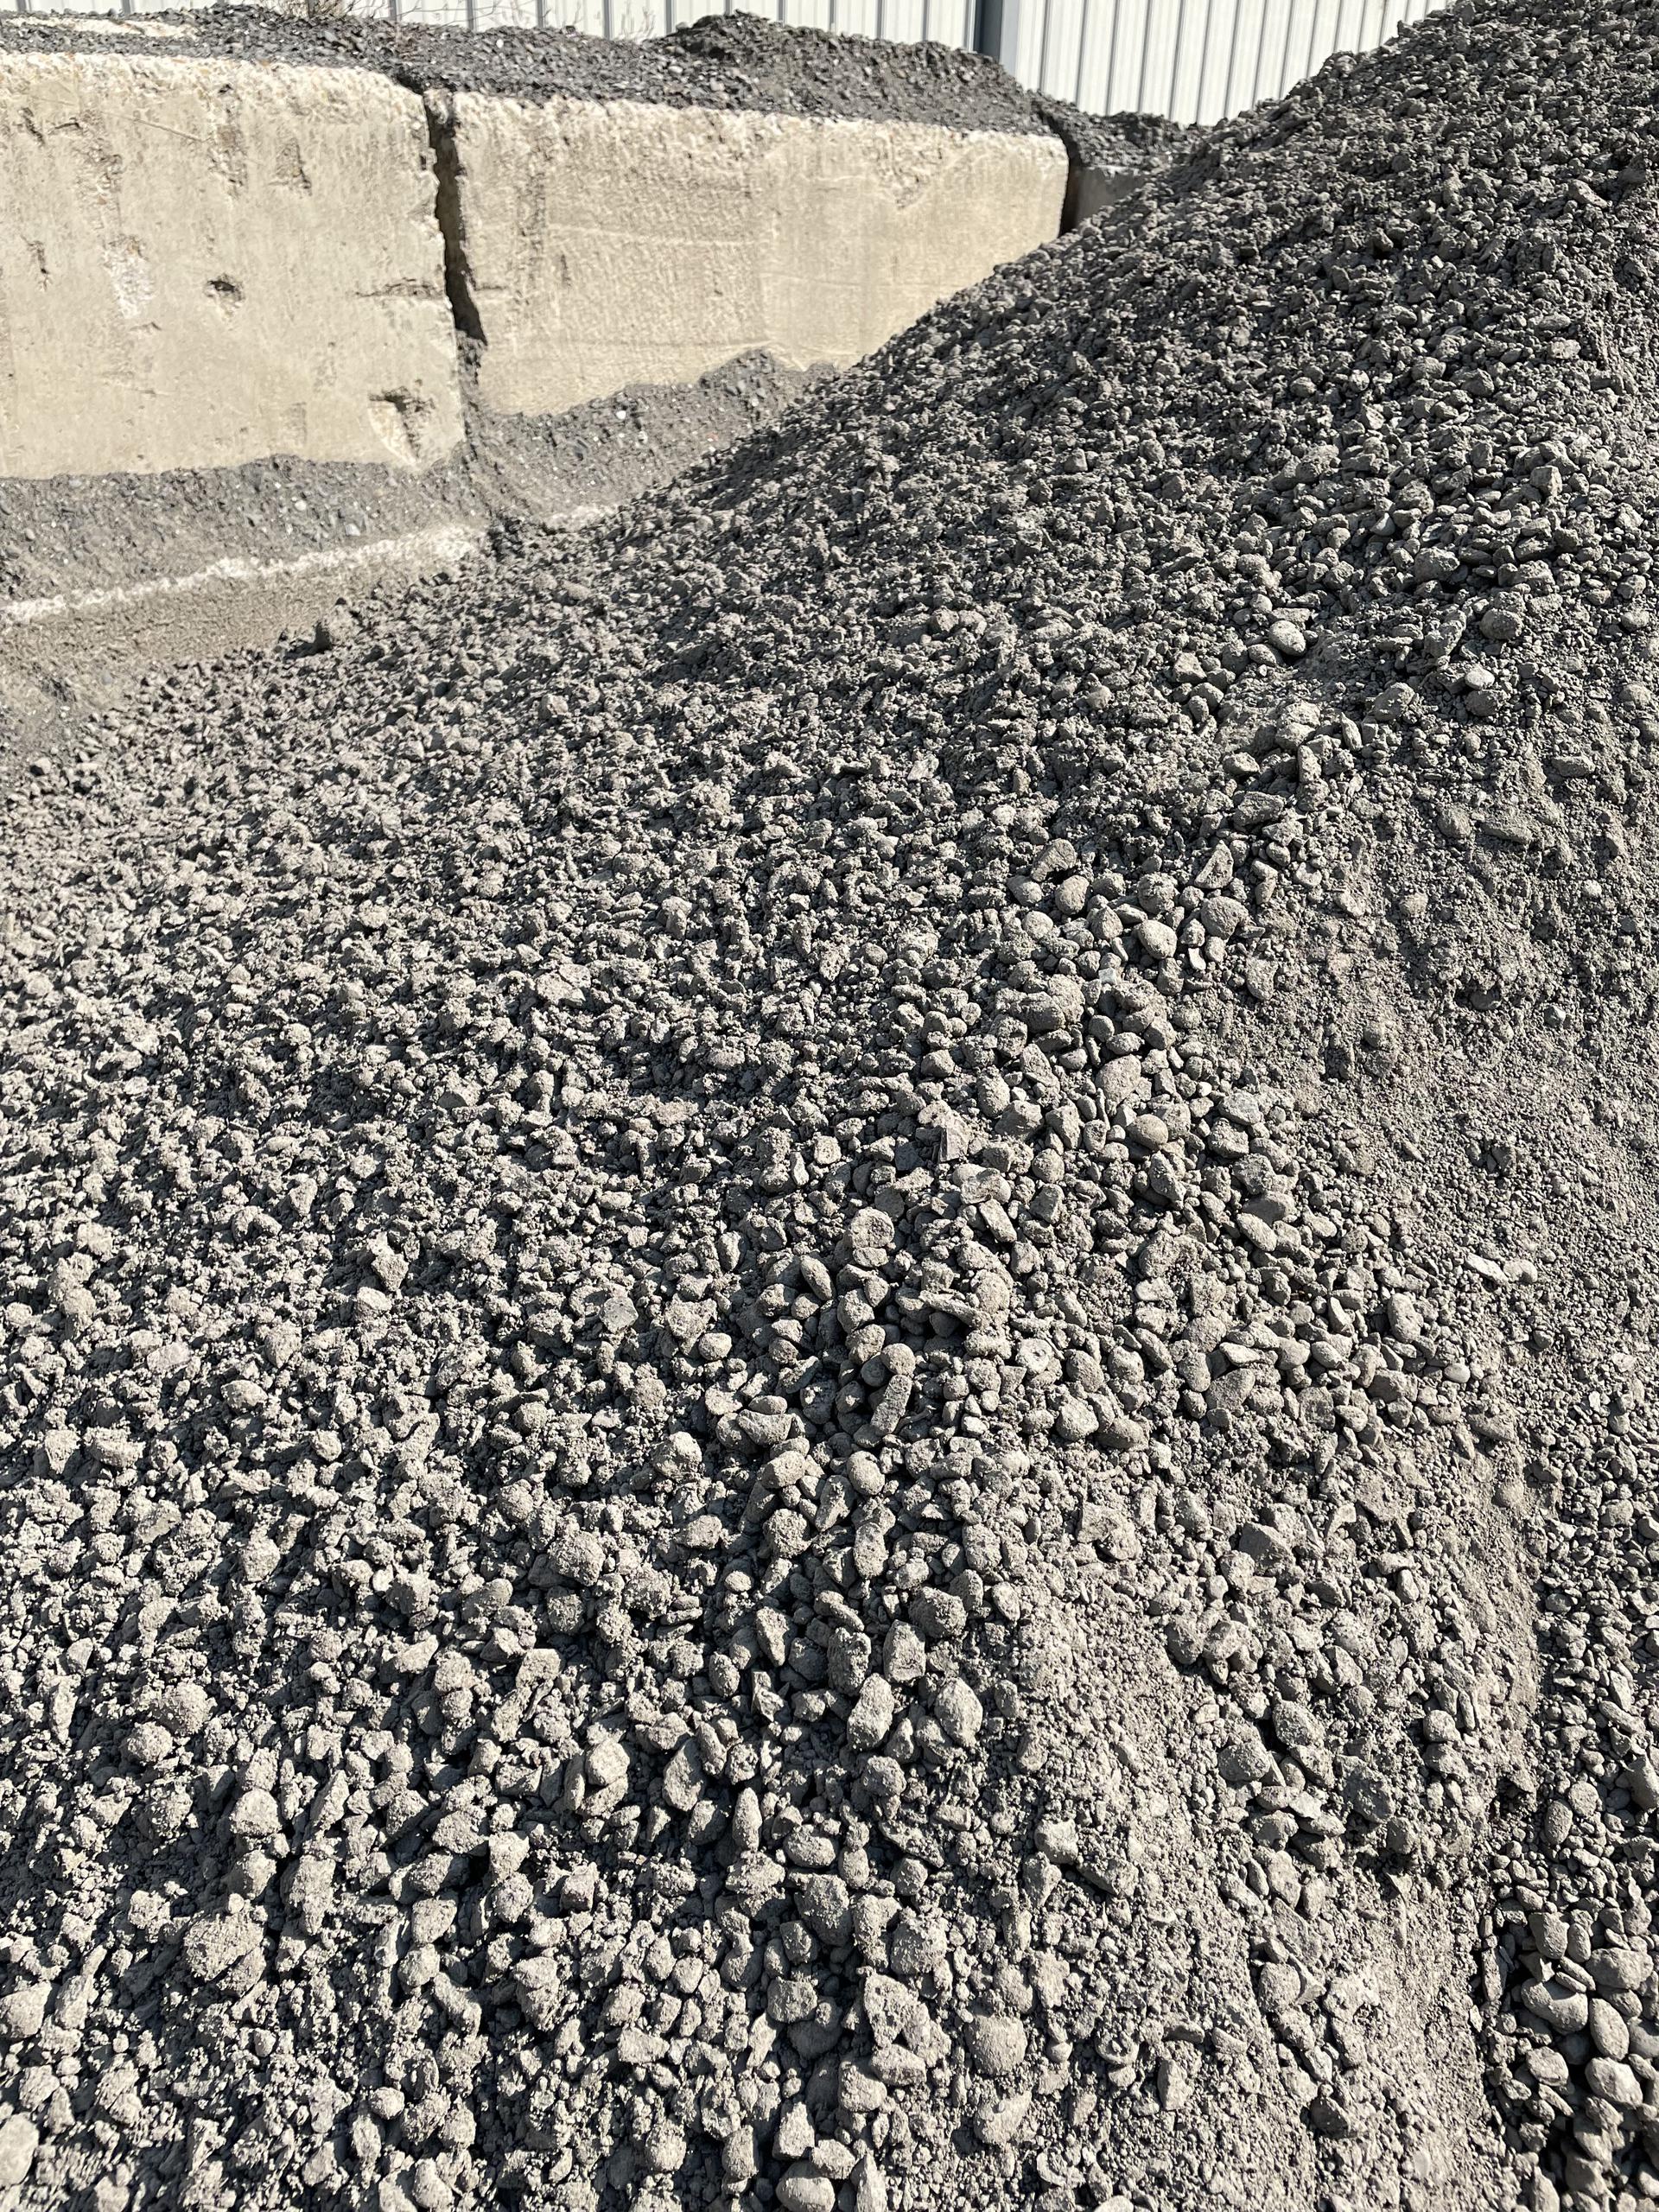 A Hill of Gray Gravel